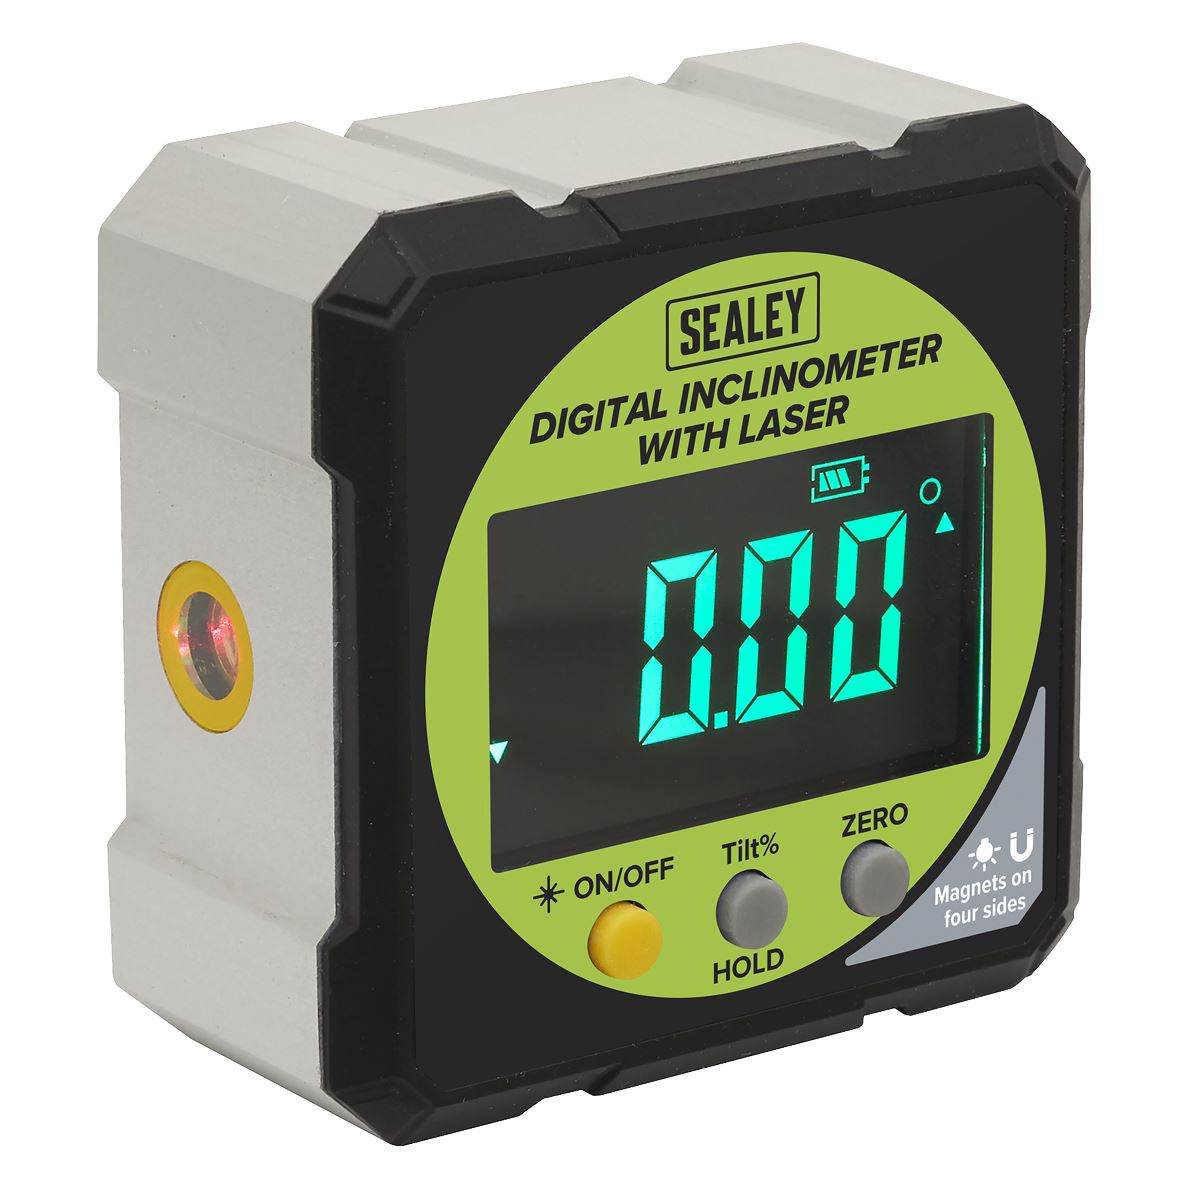 Sealey Inclinometer Digital with Laser